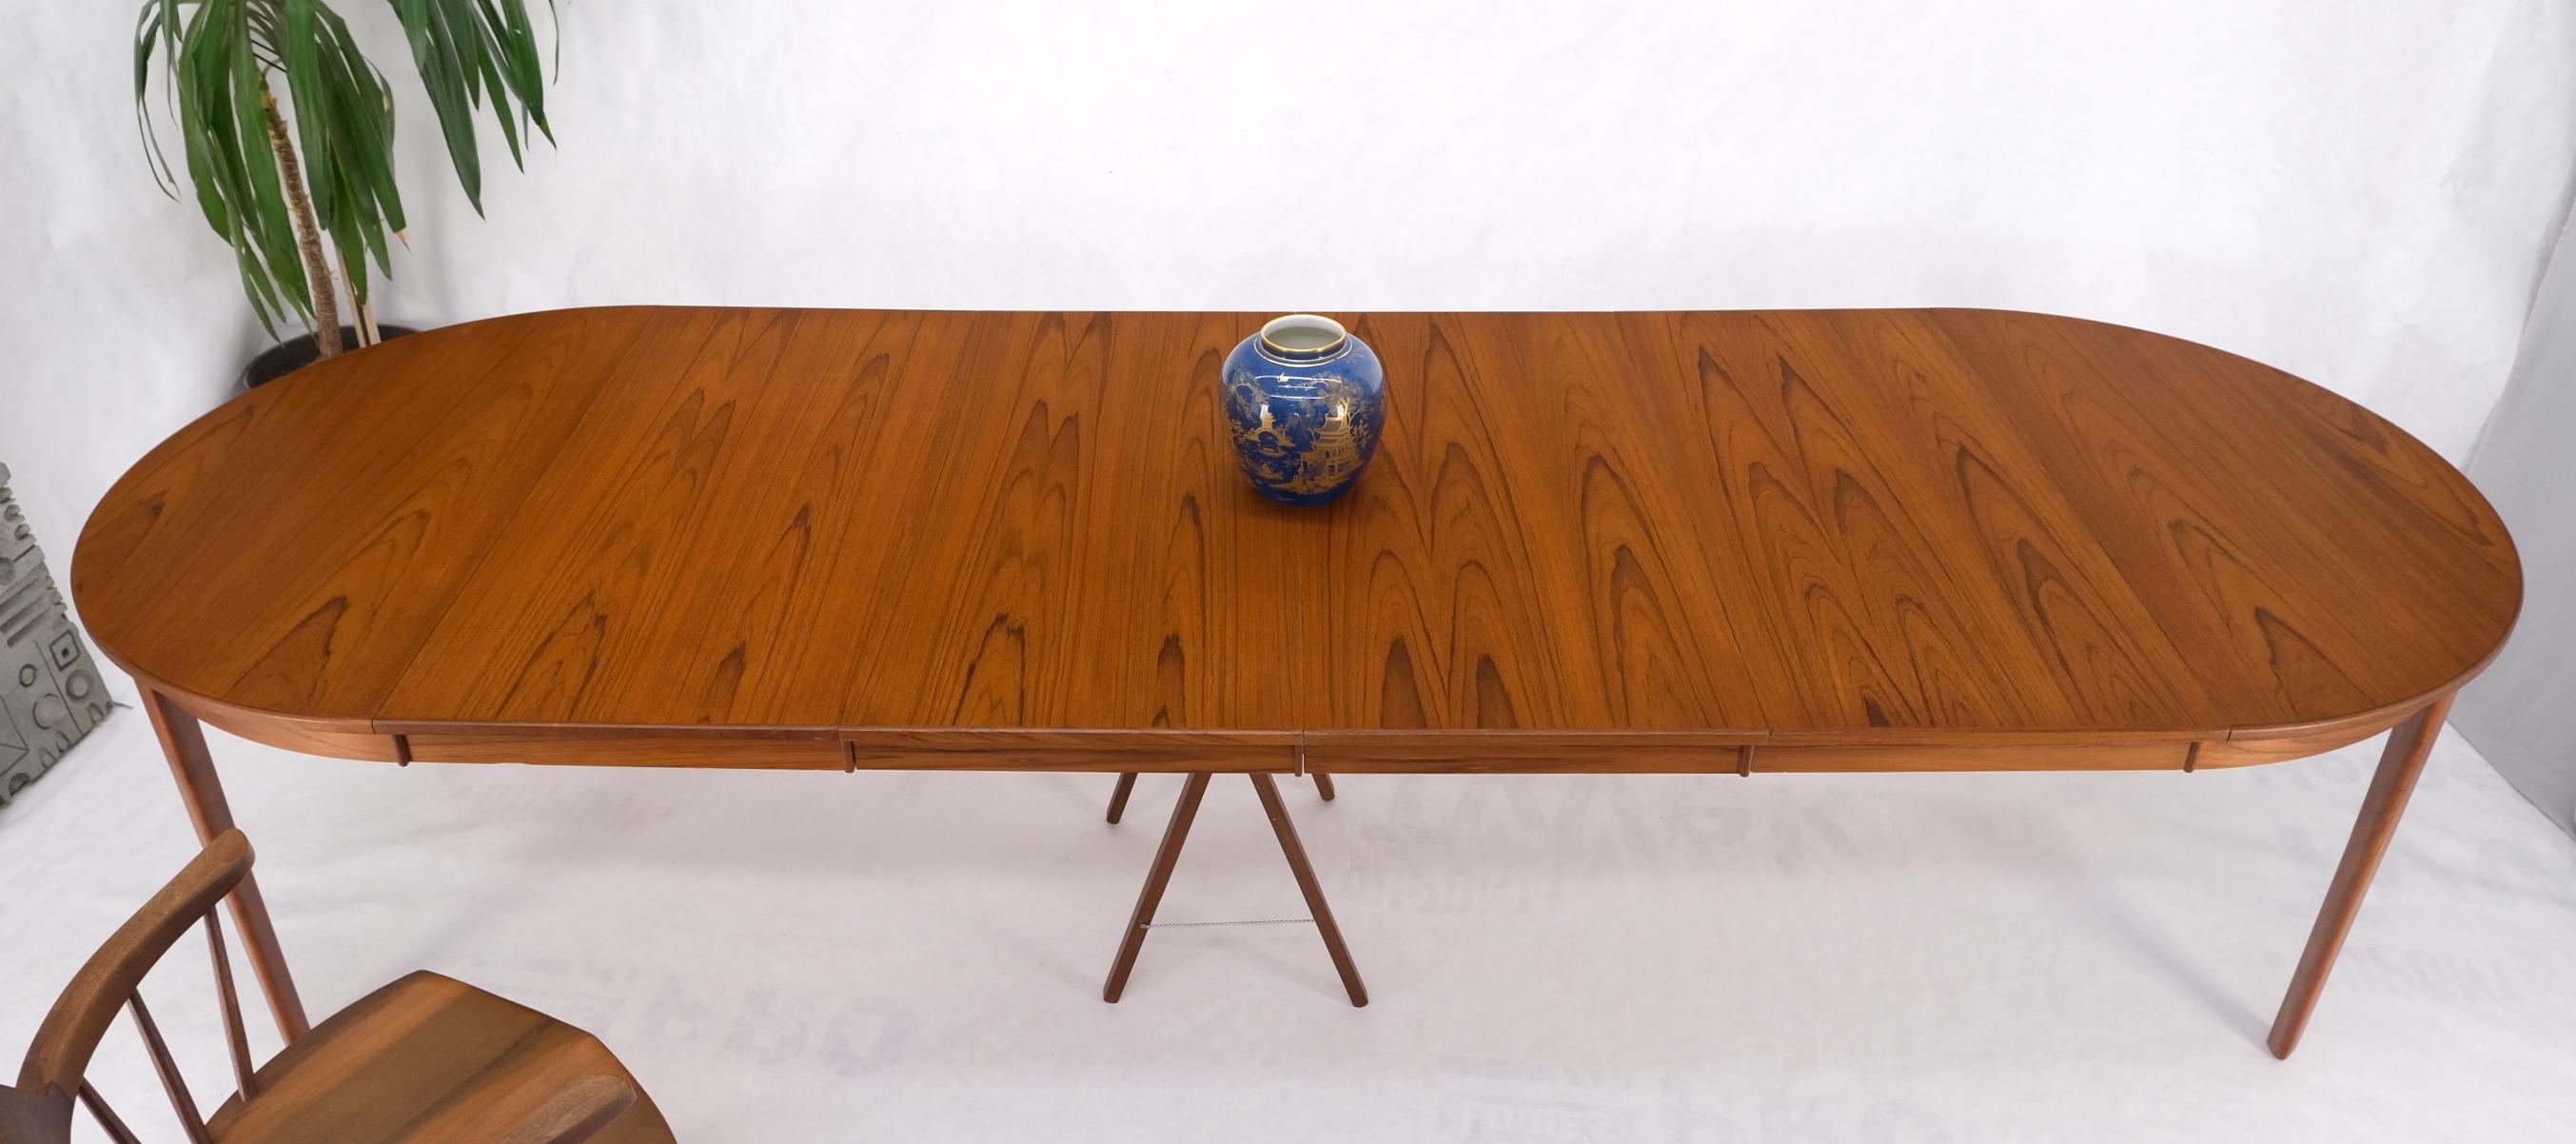 Danish Teak Mid Century Modern Round Dining Banquet Conference Table 4 Leaf MINT In Good Condition For Sale In Rockaway, NJ